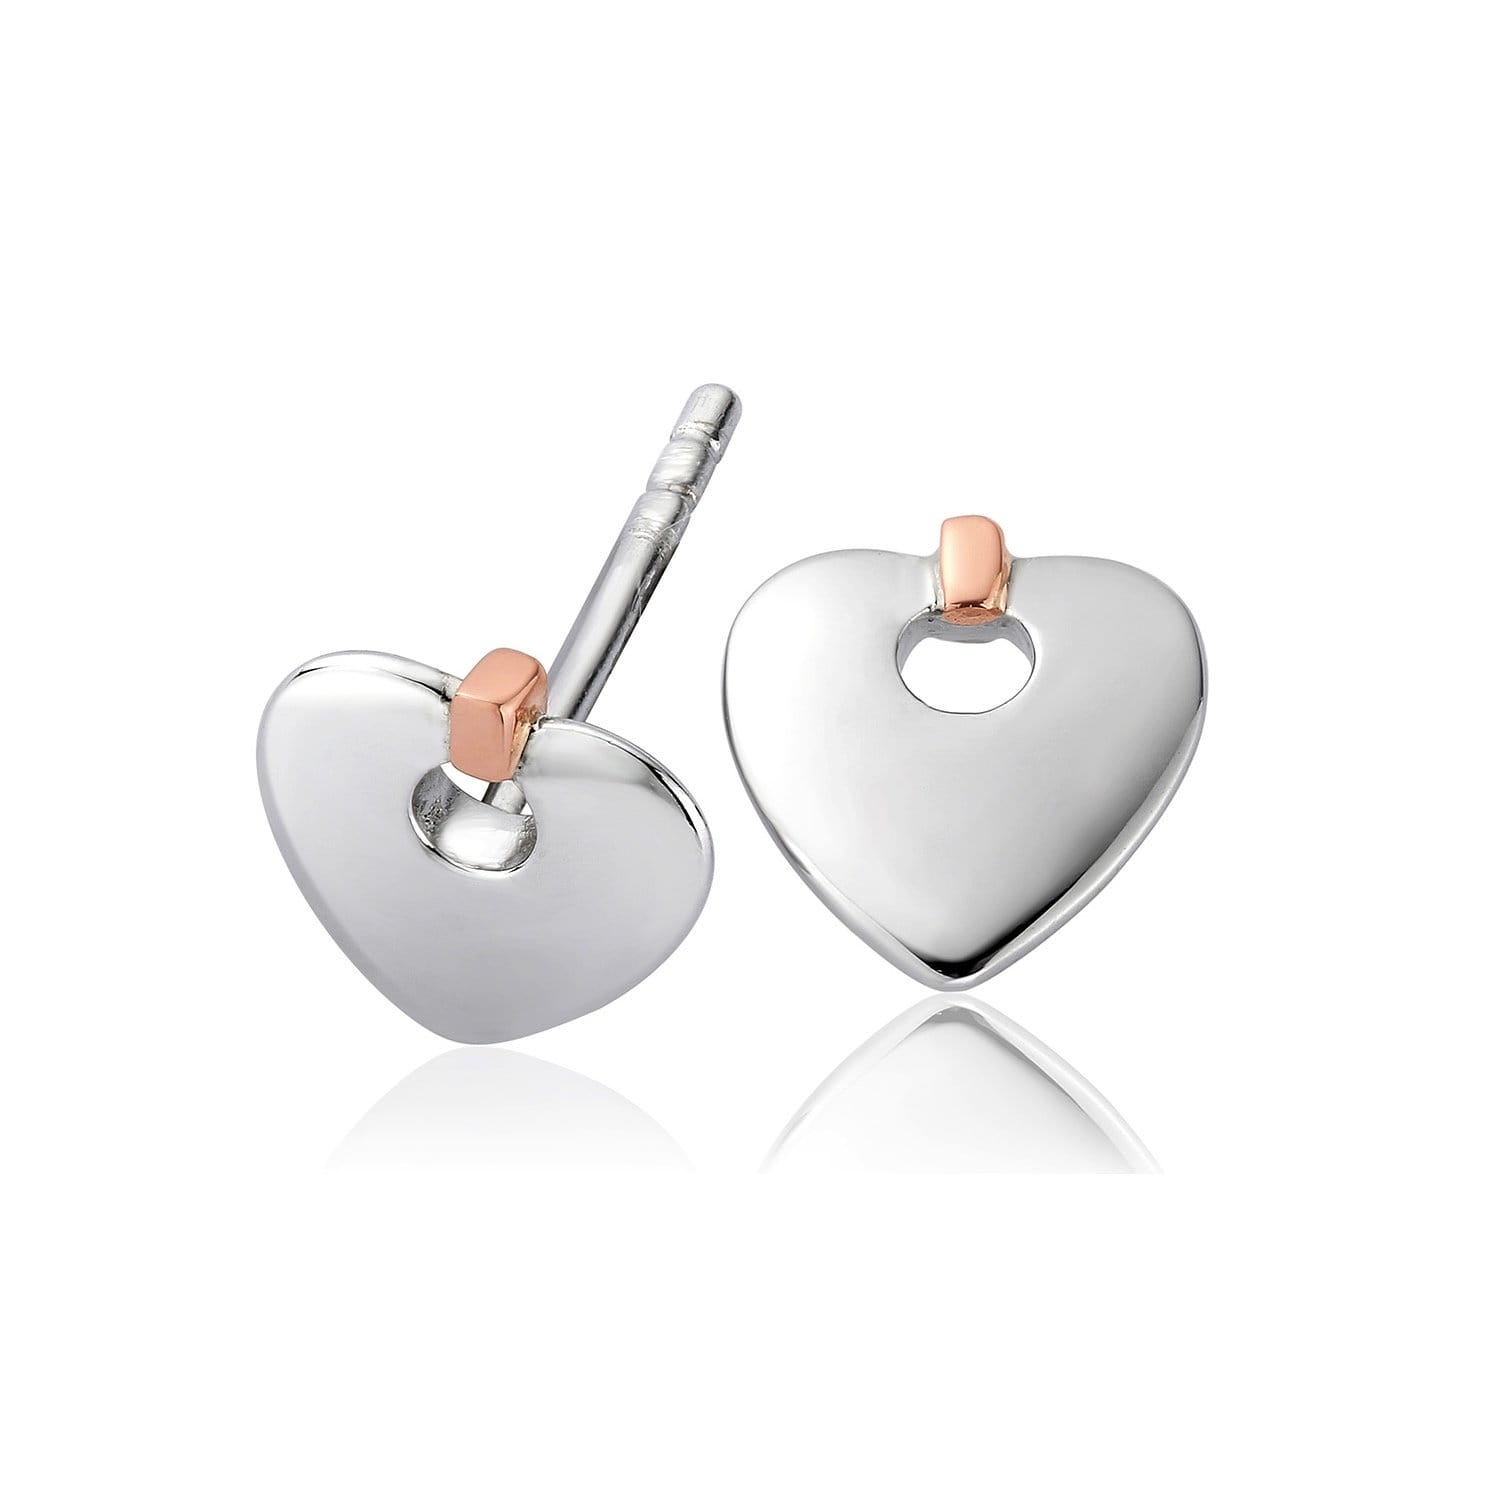 Clogau Clogau cariad earrings sterling silver with welsh rose gold 9 ct . 